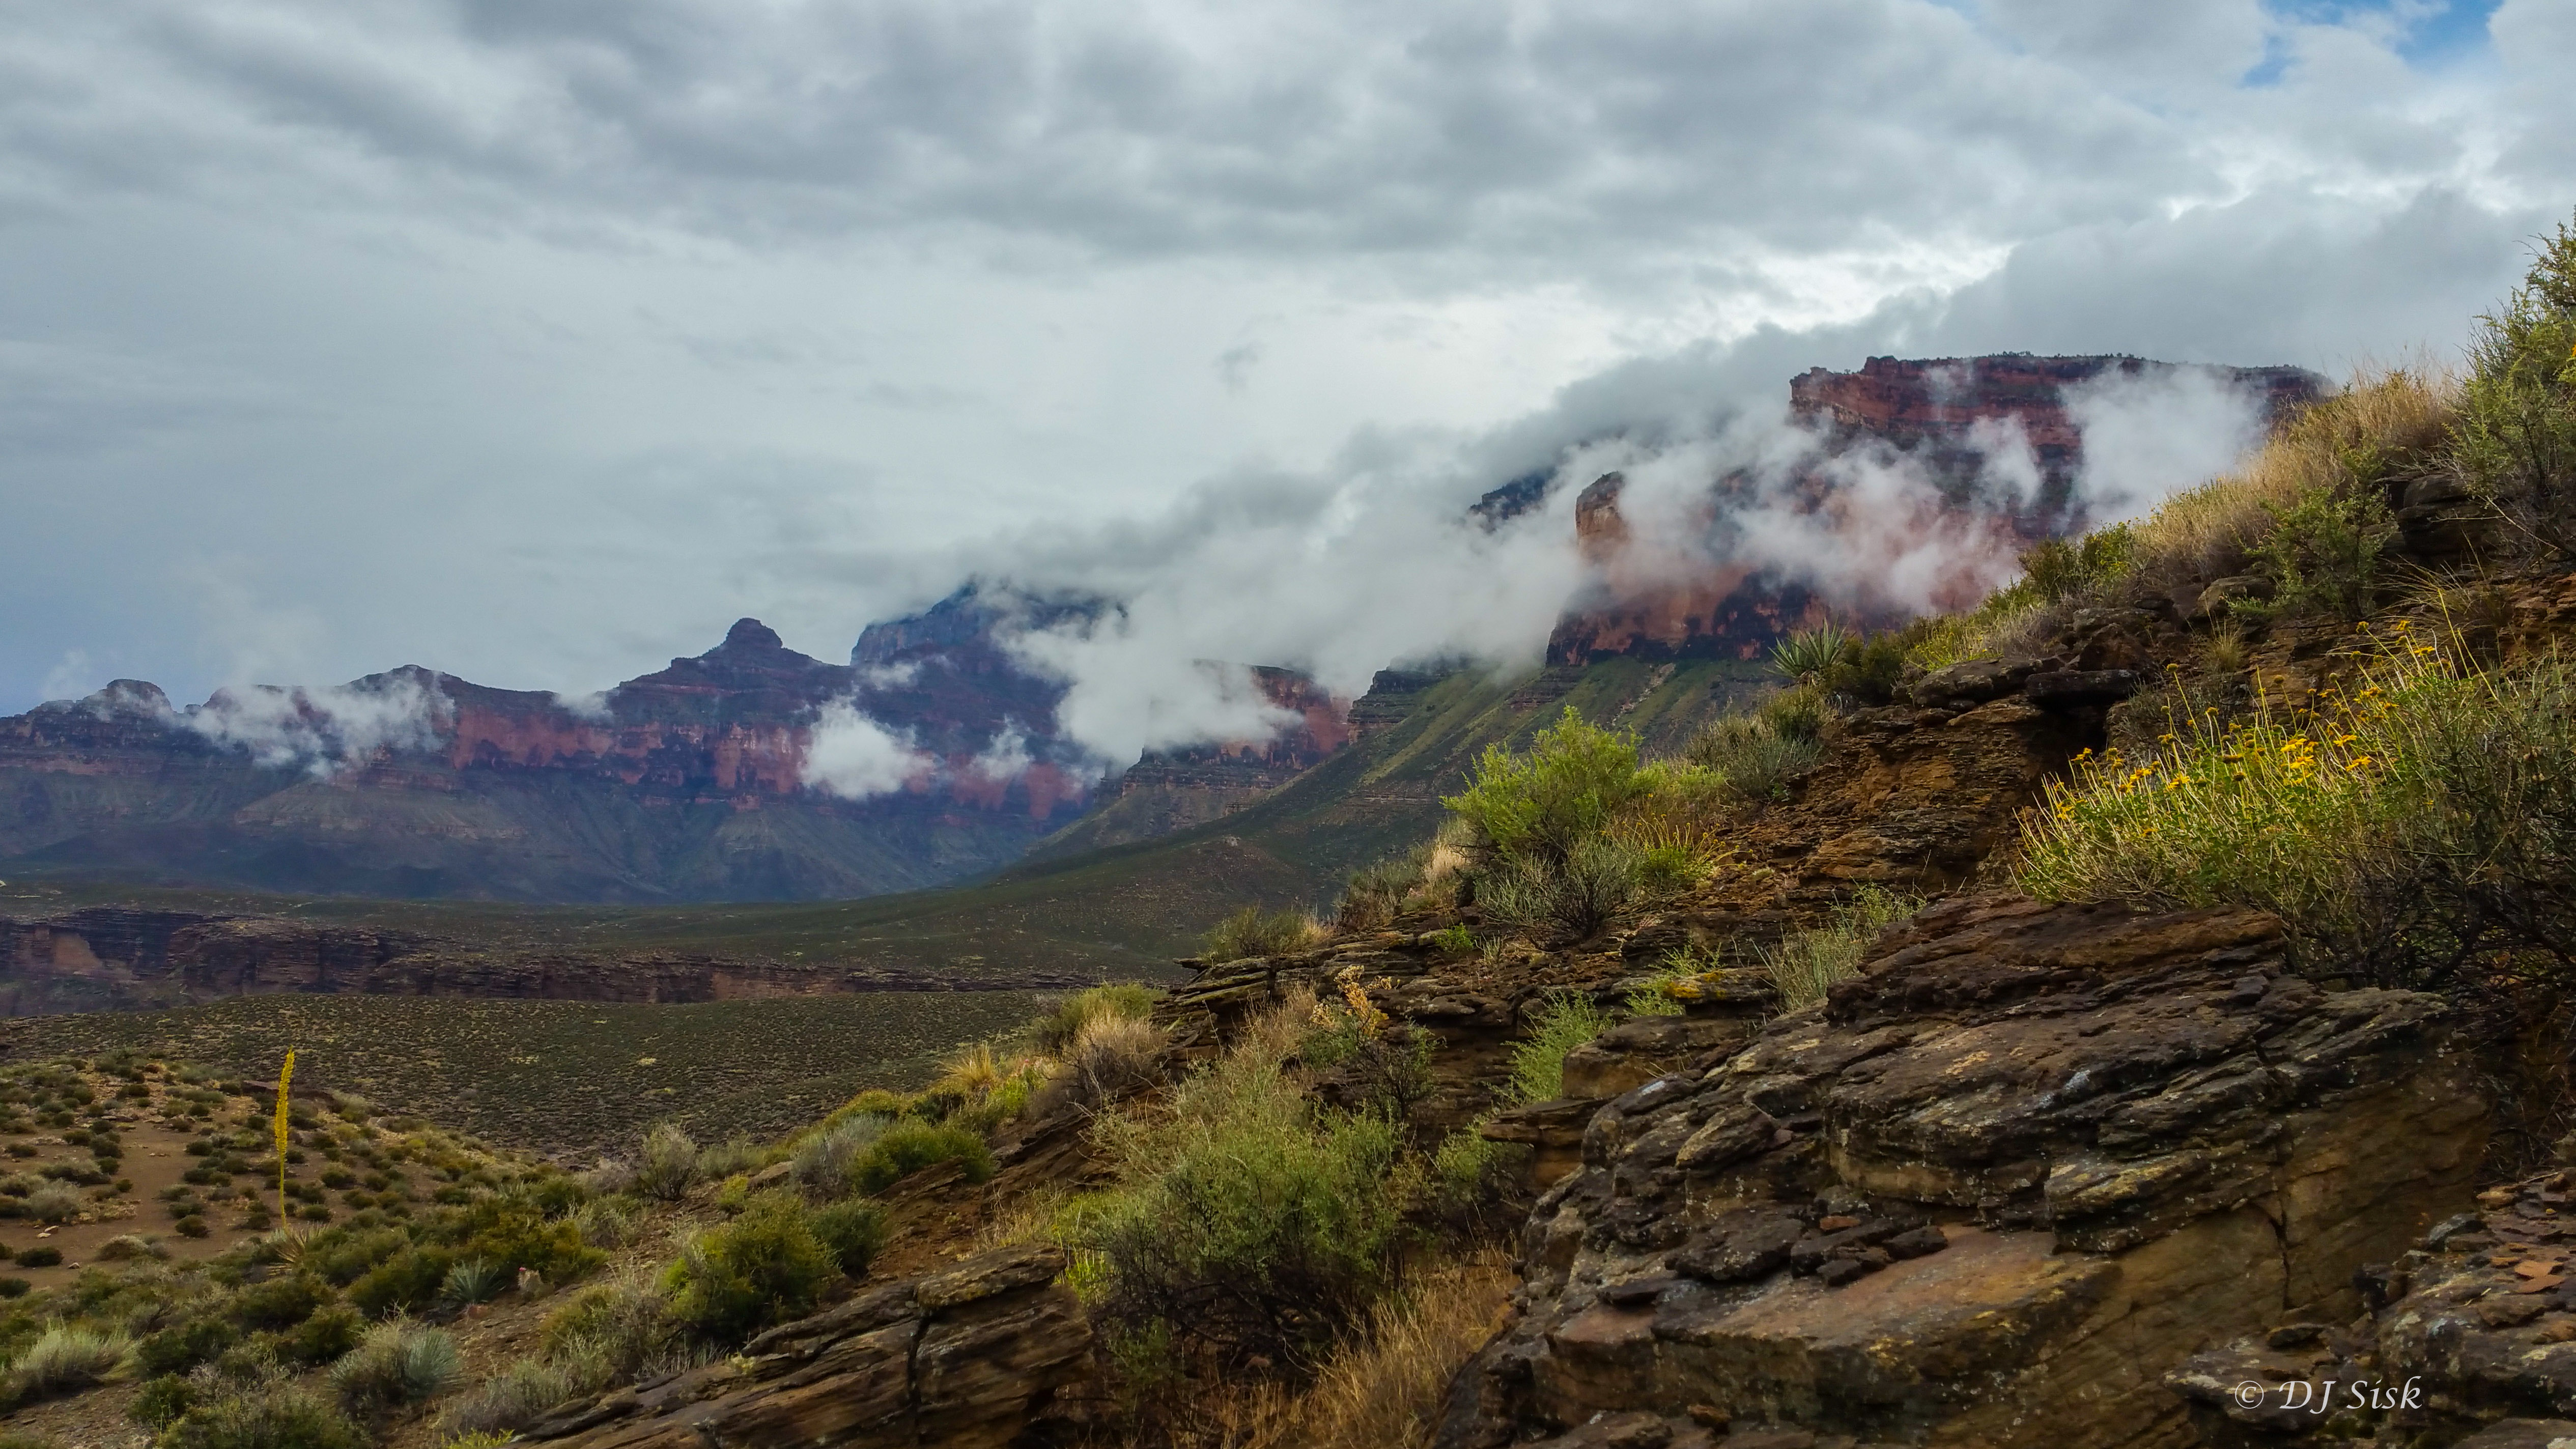 Hermit Loop trail with Storm Approaching on Grand Canyon Challenge